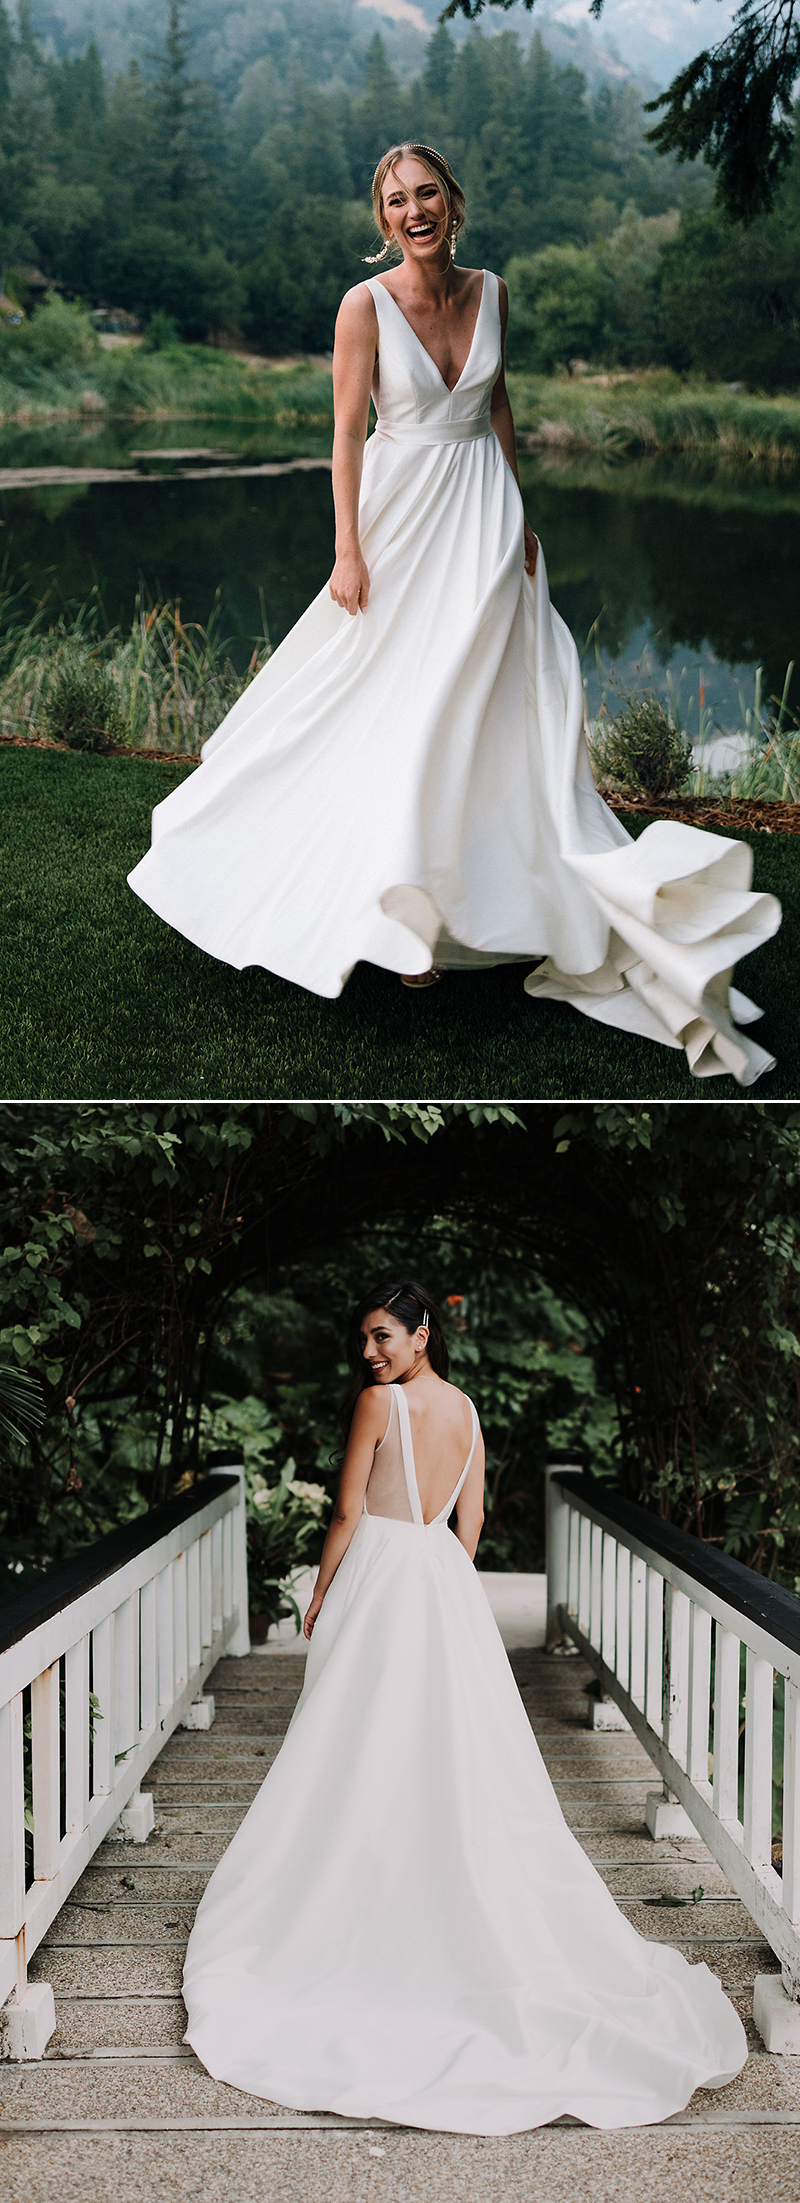 Risque Wedding Dresses with Pockets